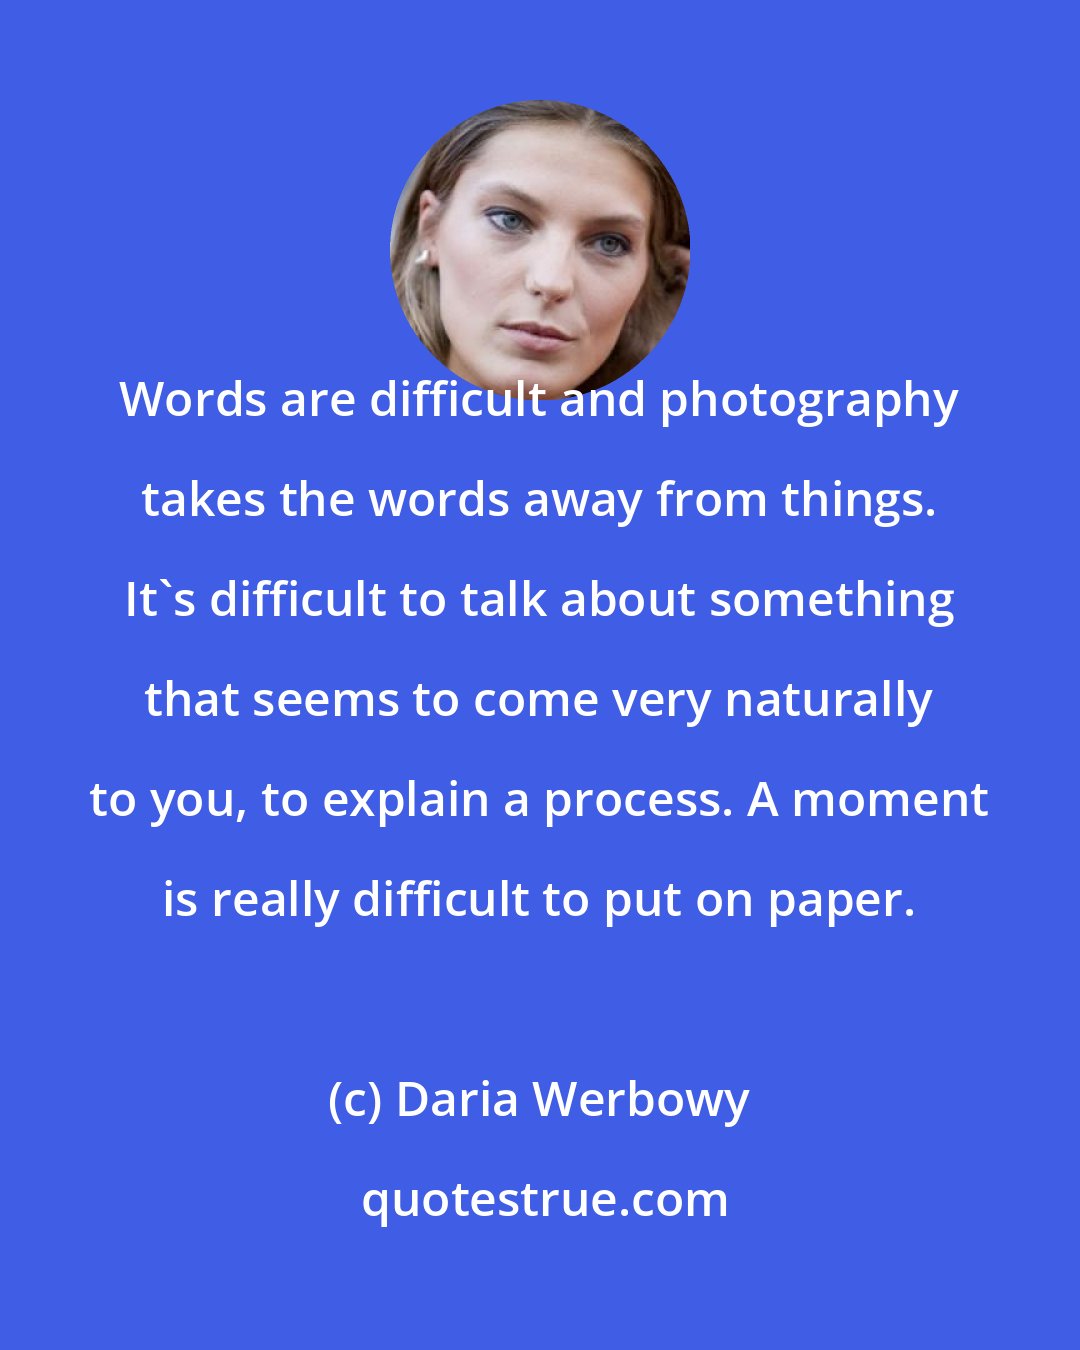 Daria Werbowy: Words are difficult and photography takes the words away from things. It's difficult to talk about something that seems to come very naturally to you, to explain a process. A moment is really difficult to put on paper.